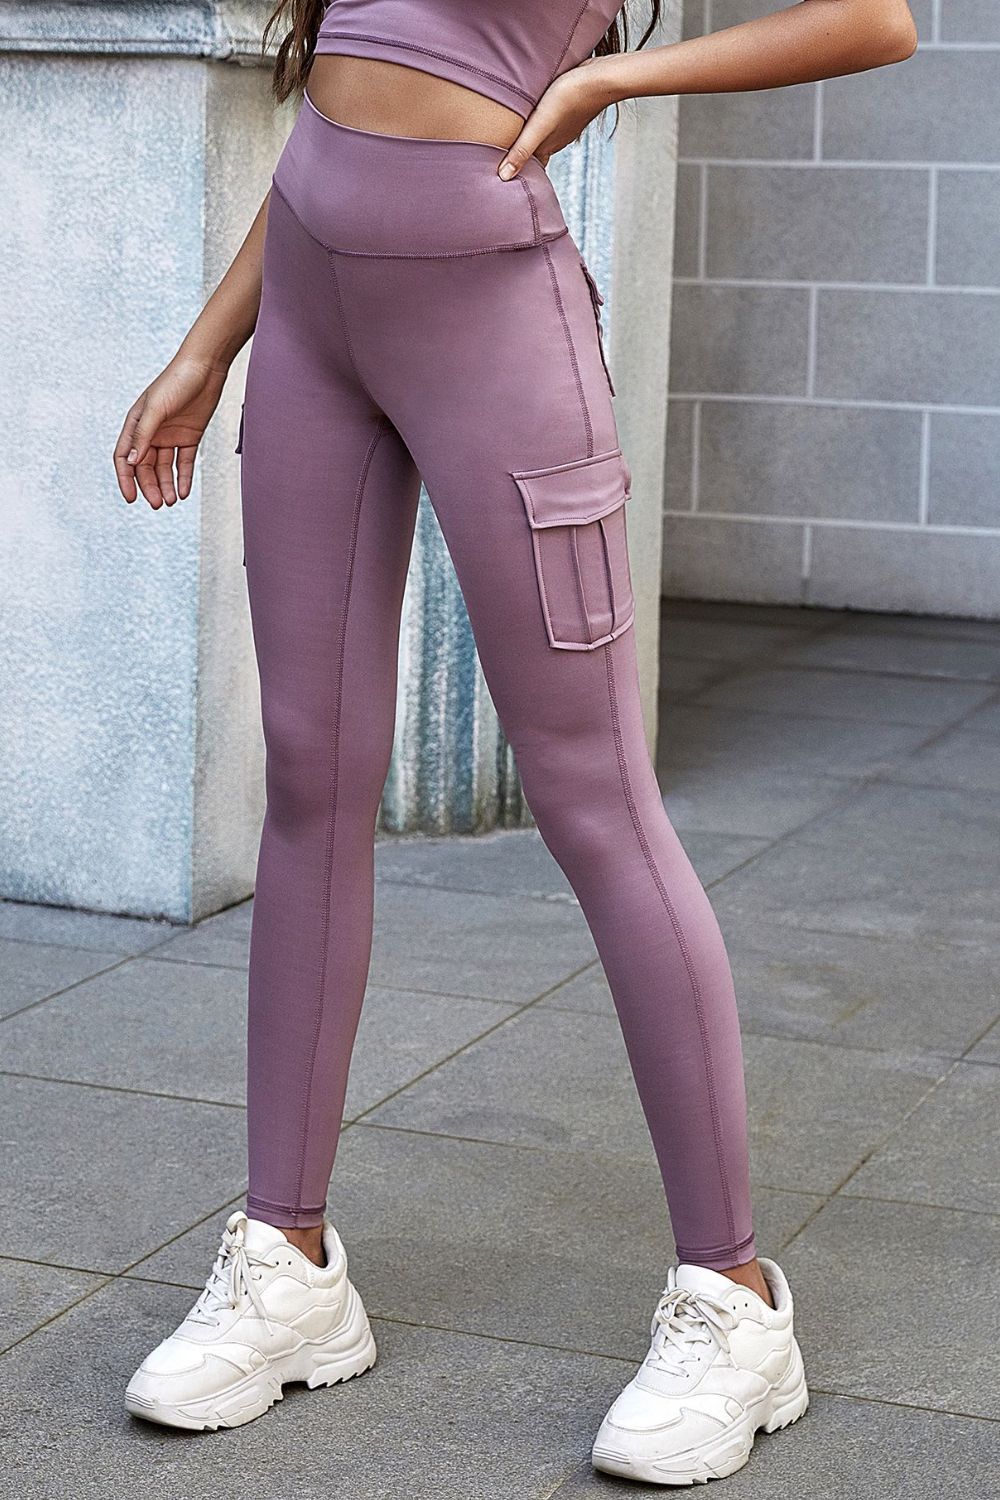 High Waist Leggings with Pockets - Purple / S - Women’s Clothing & Accessories - Pants - 5 - 2024